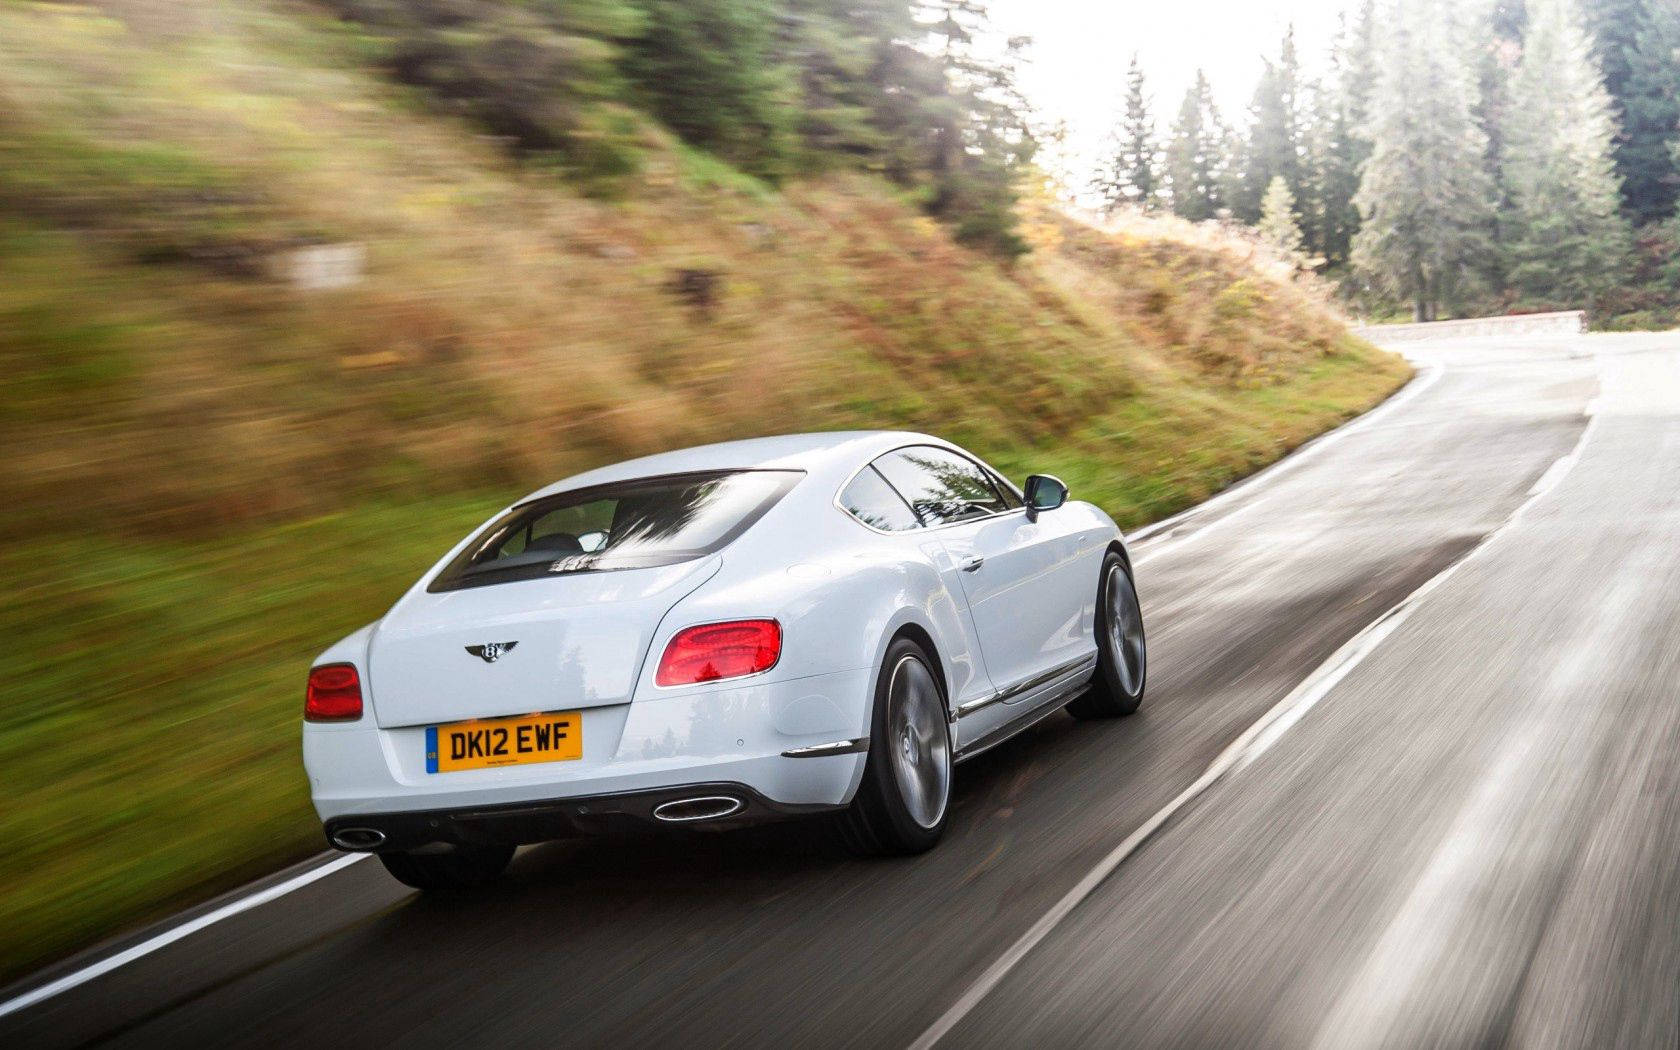 Take the Road in Style: A Rear View of a White Bentley Continental GT Wallpaper